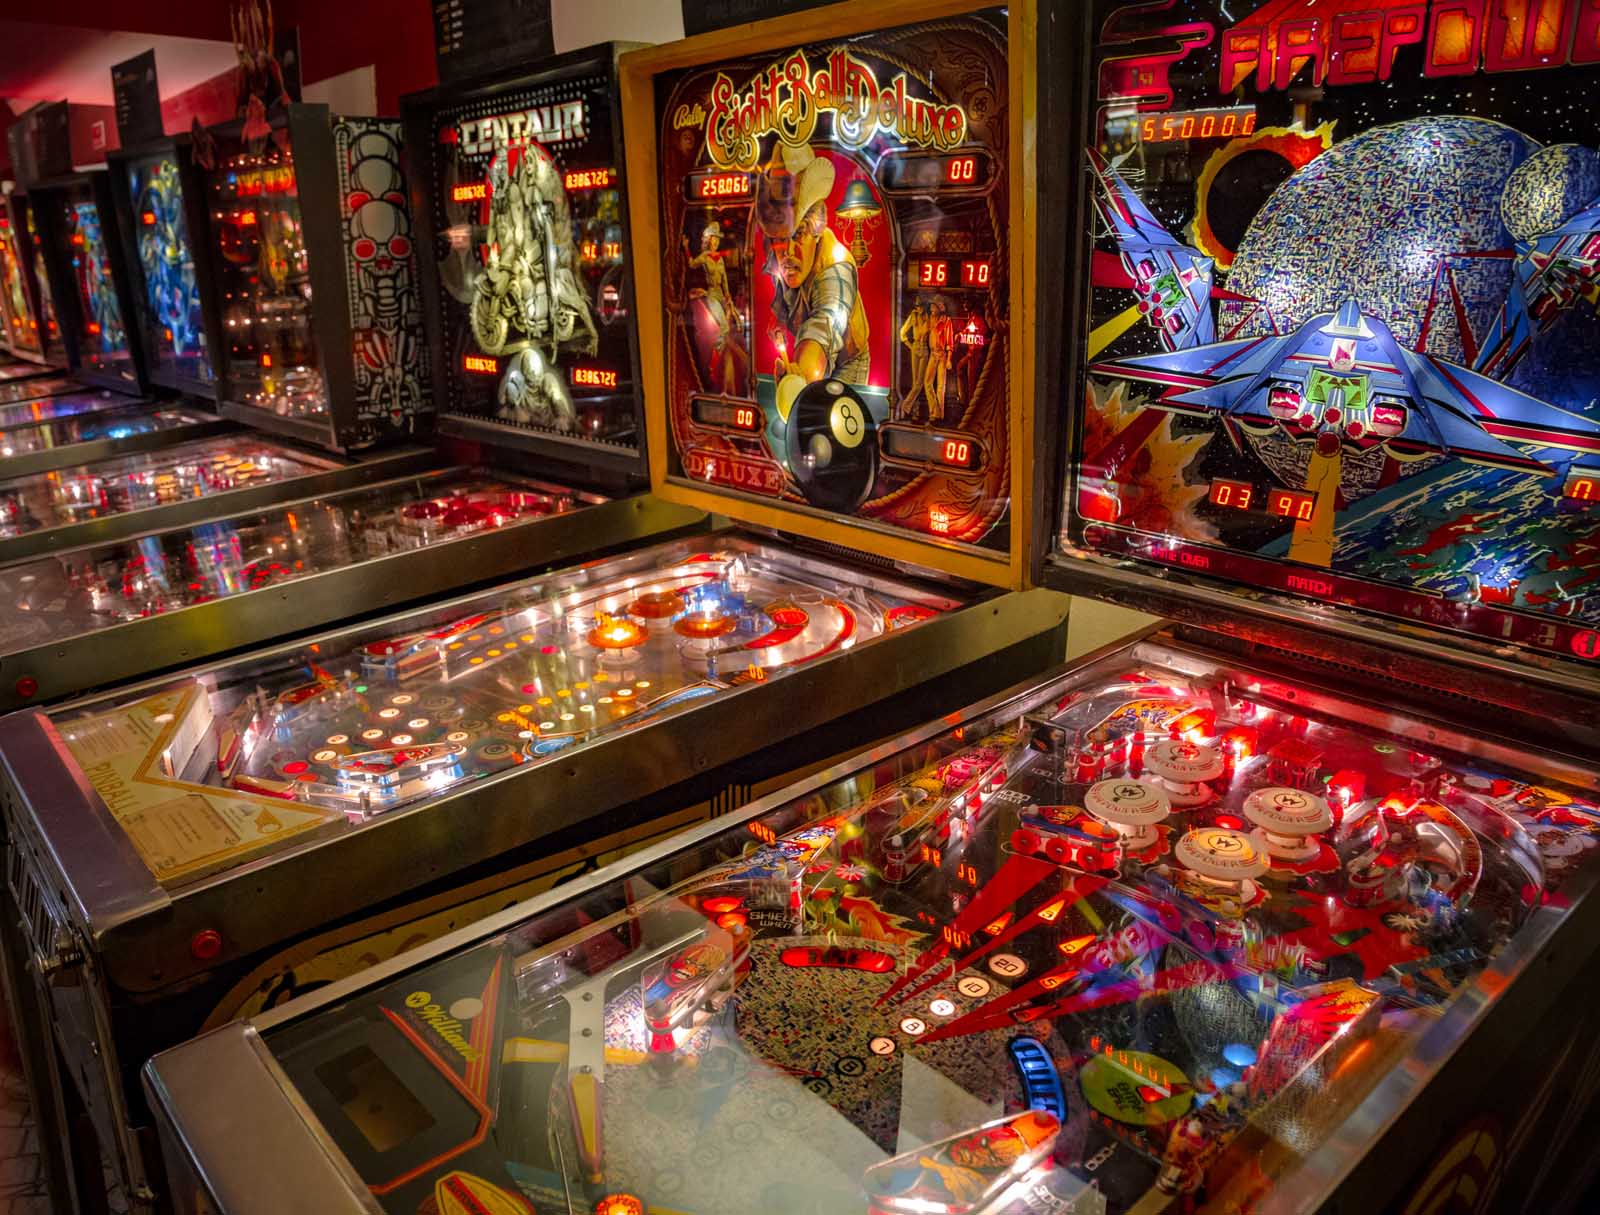 Things to do in Myrtle Beach Pinball Museum